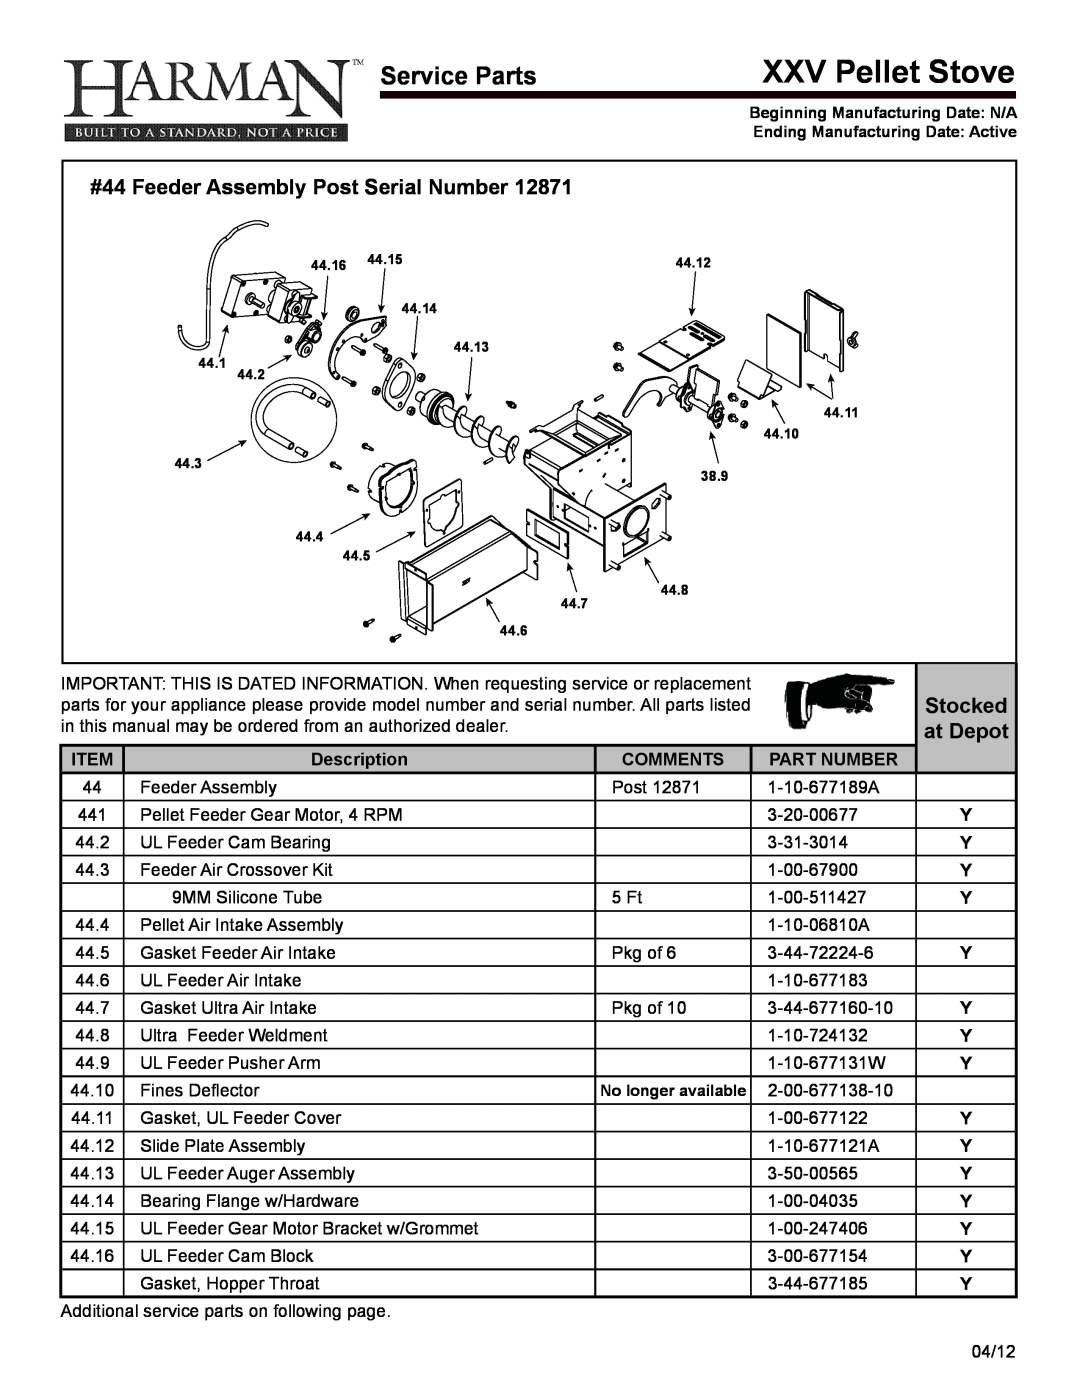 Harman Stove Company R16 manual XXV Pellet Stove, #44 Feeder assembly Post Serial number, Stocked, at depot 